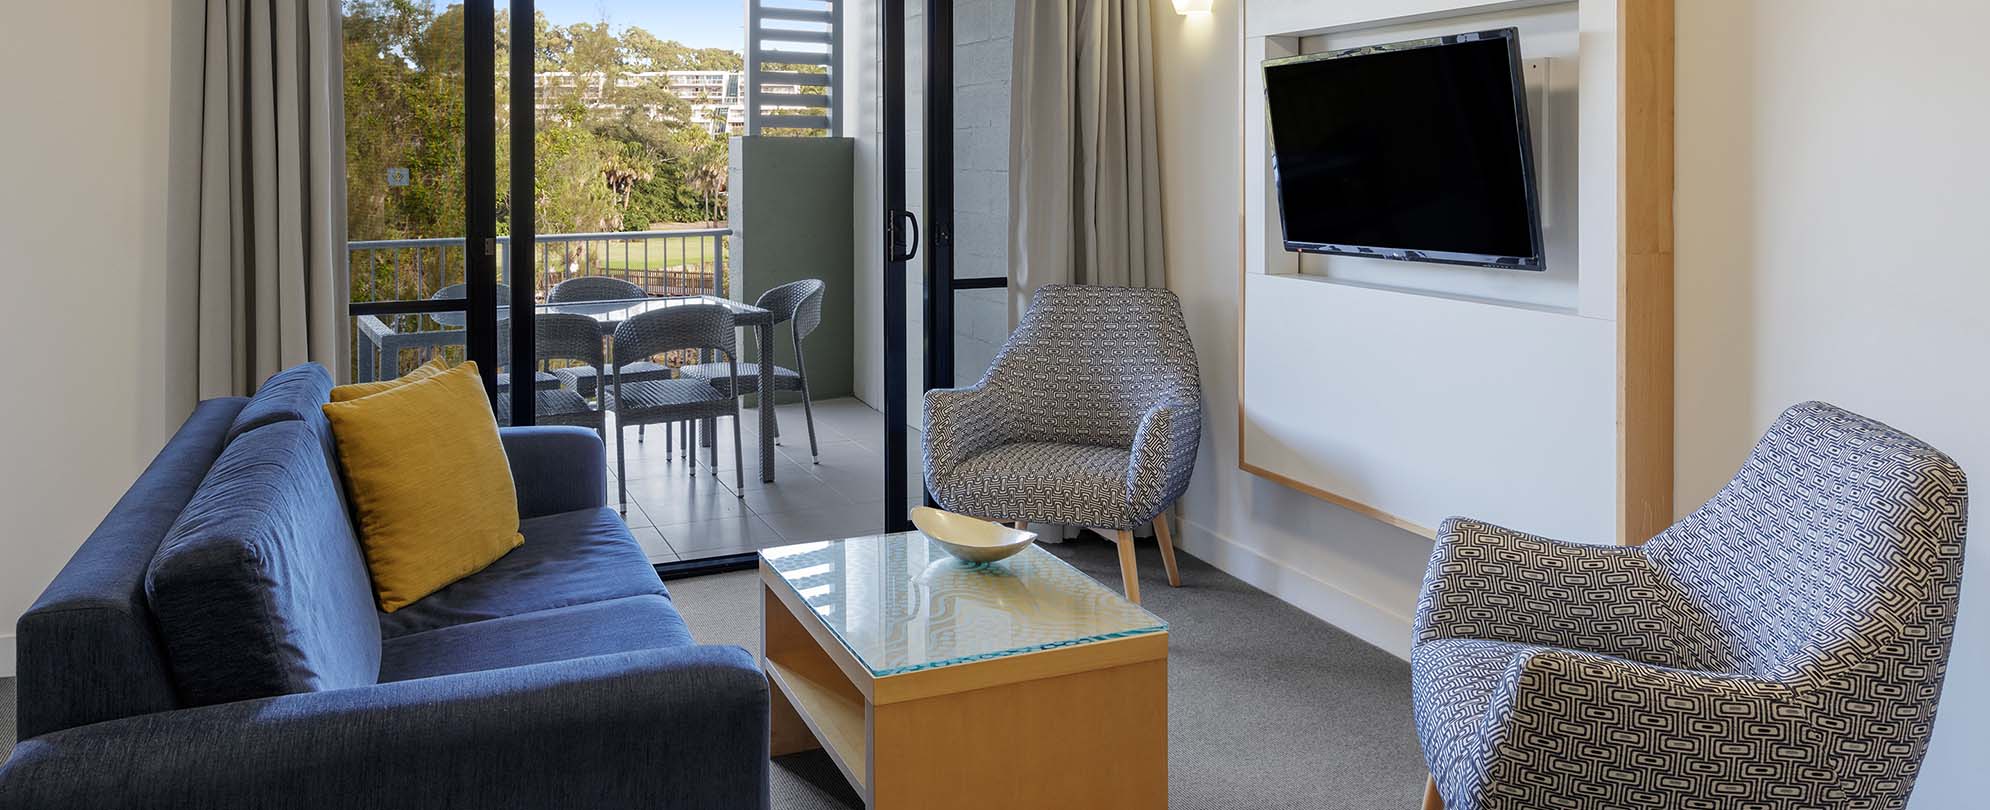 The living room of a 2-bedroom suite at Club Wyndham Coffs Harbor.